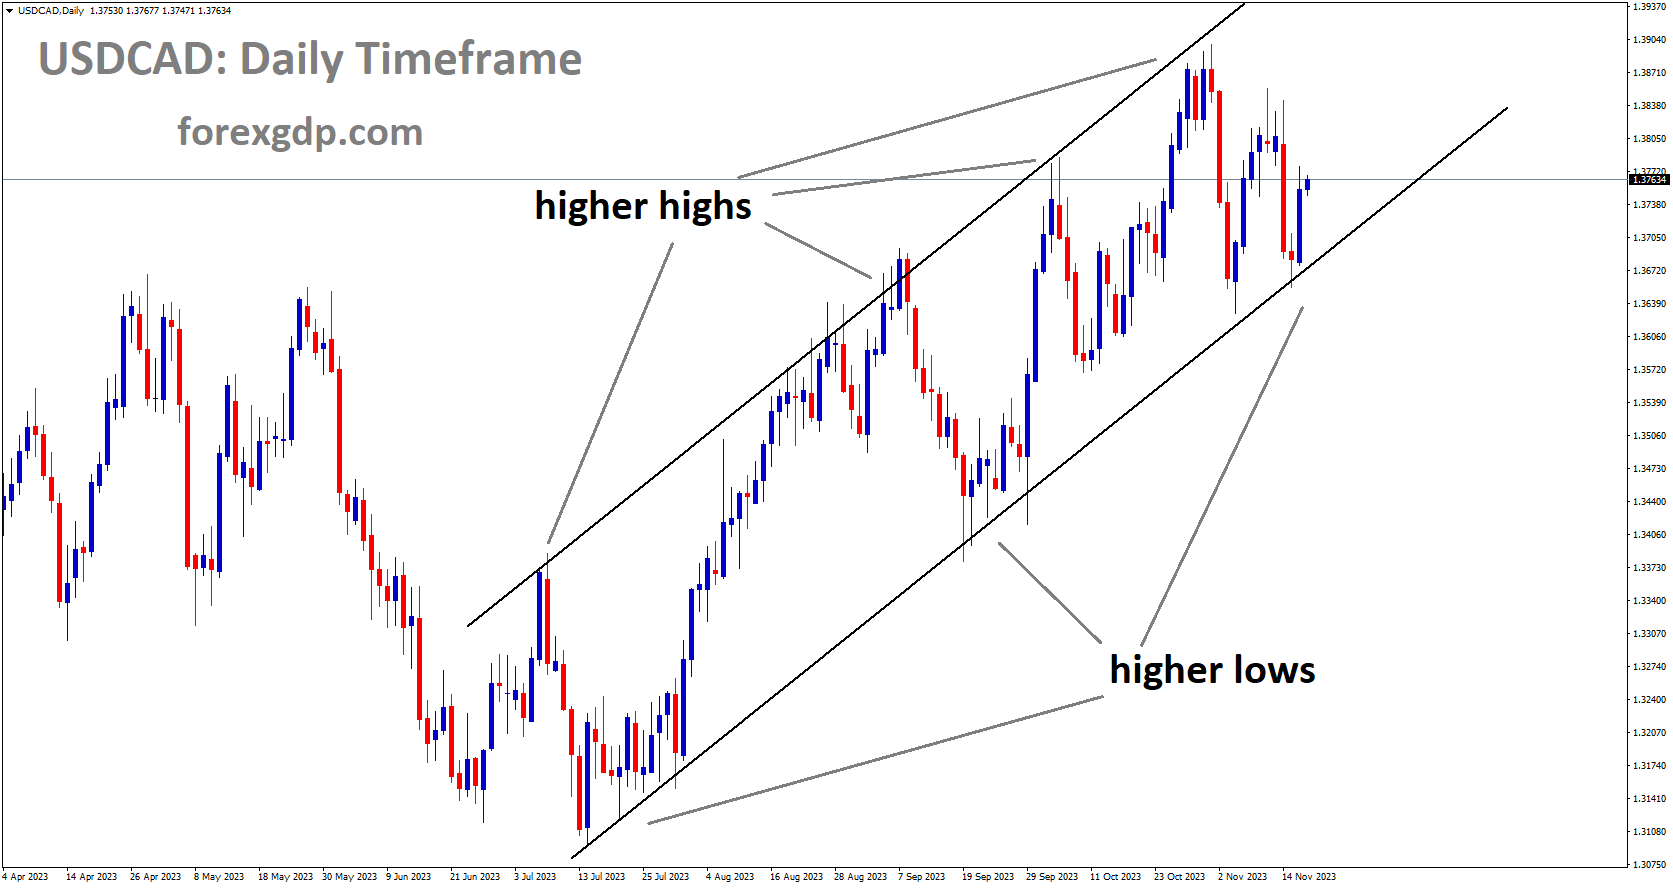 USDCAD is moving in a ascending channel and the maket has reached higher low area of the channel